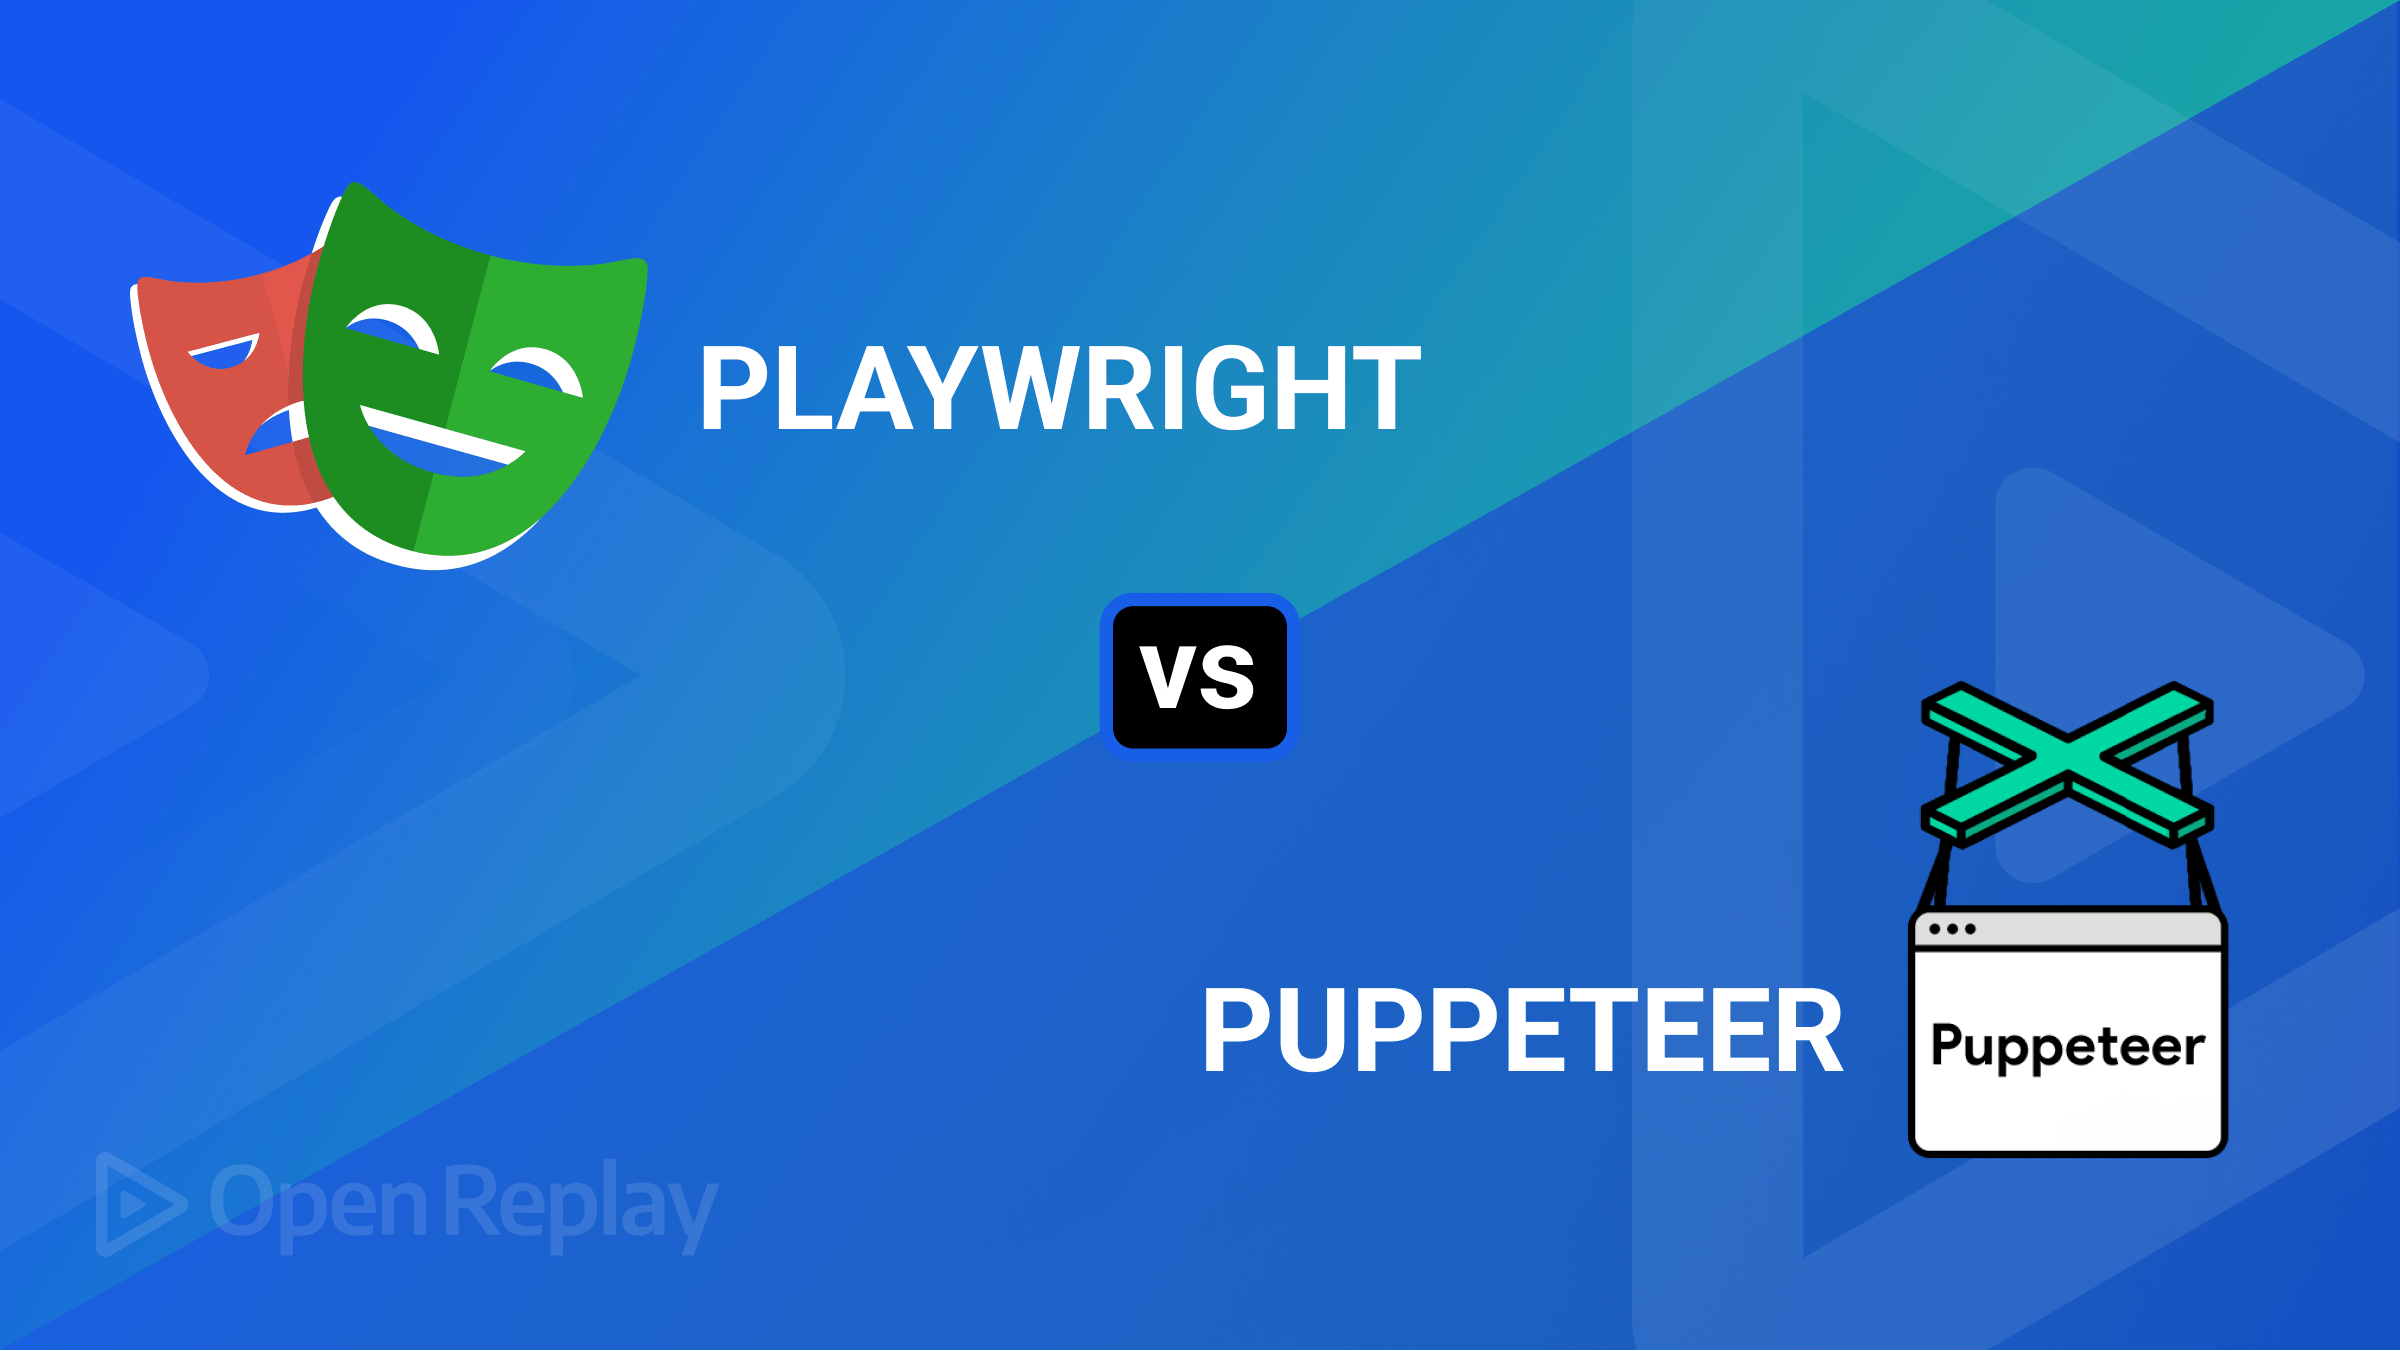 Playwright vs Puppeteer: which to choose?